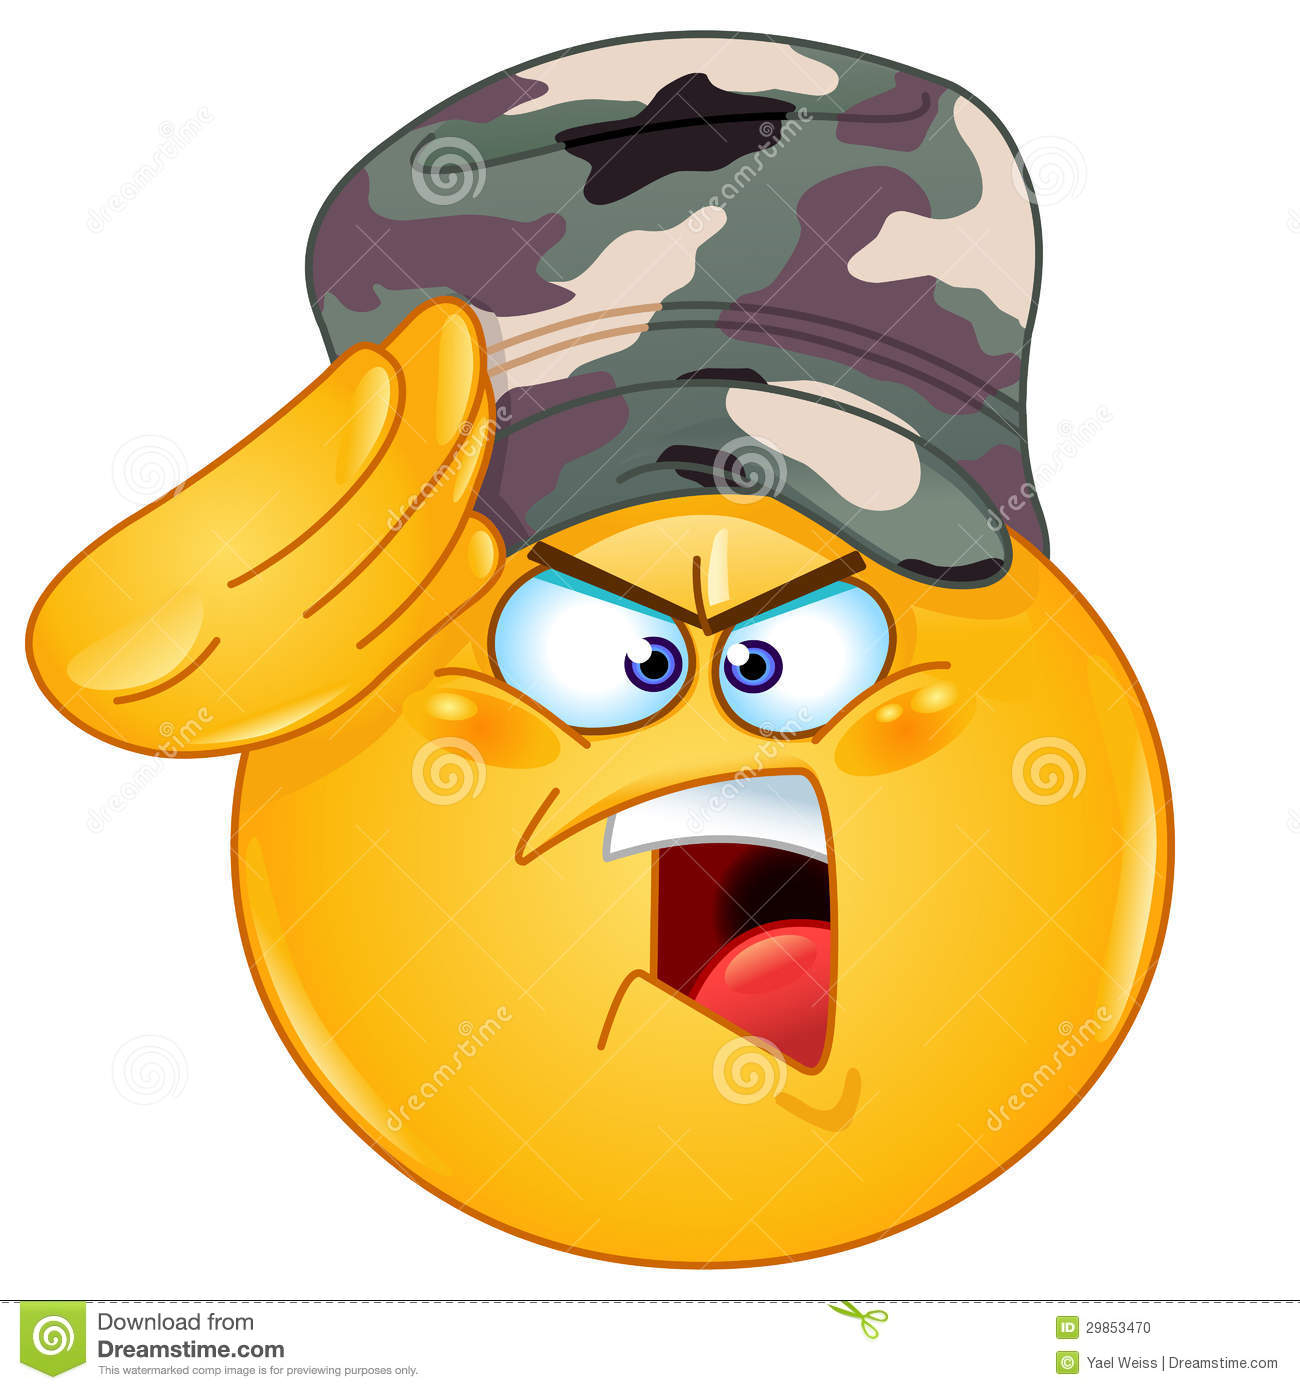 Soldier Emoticon Saluting Saying Yes Sir